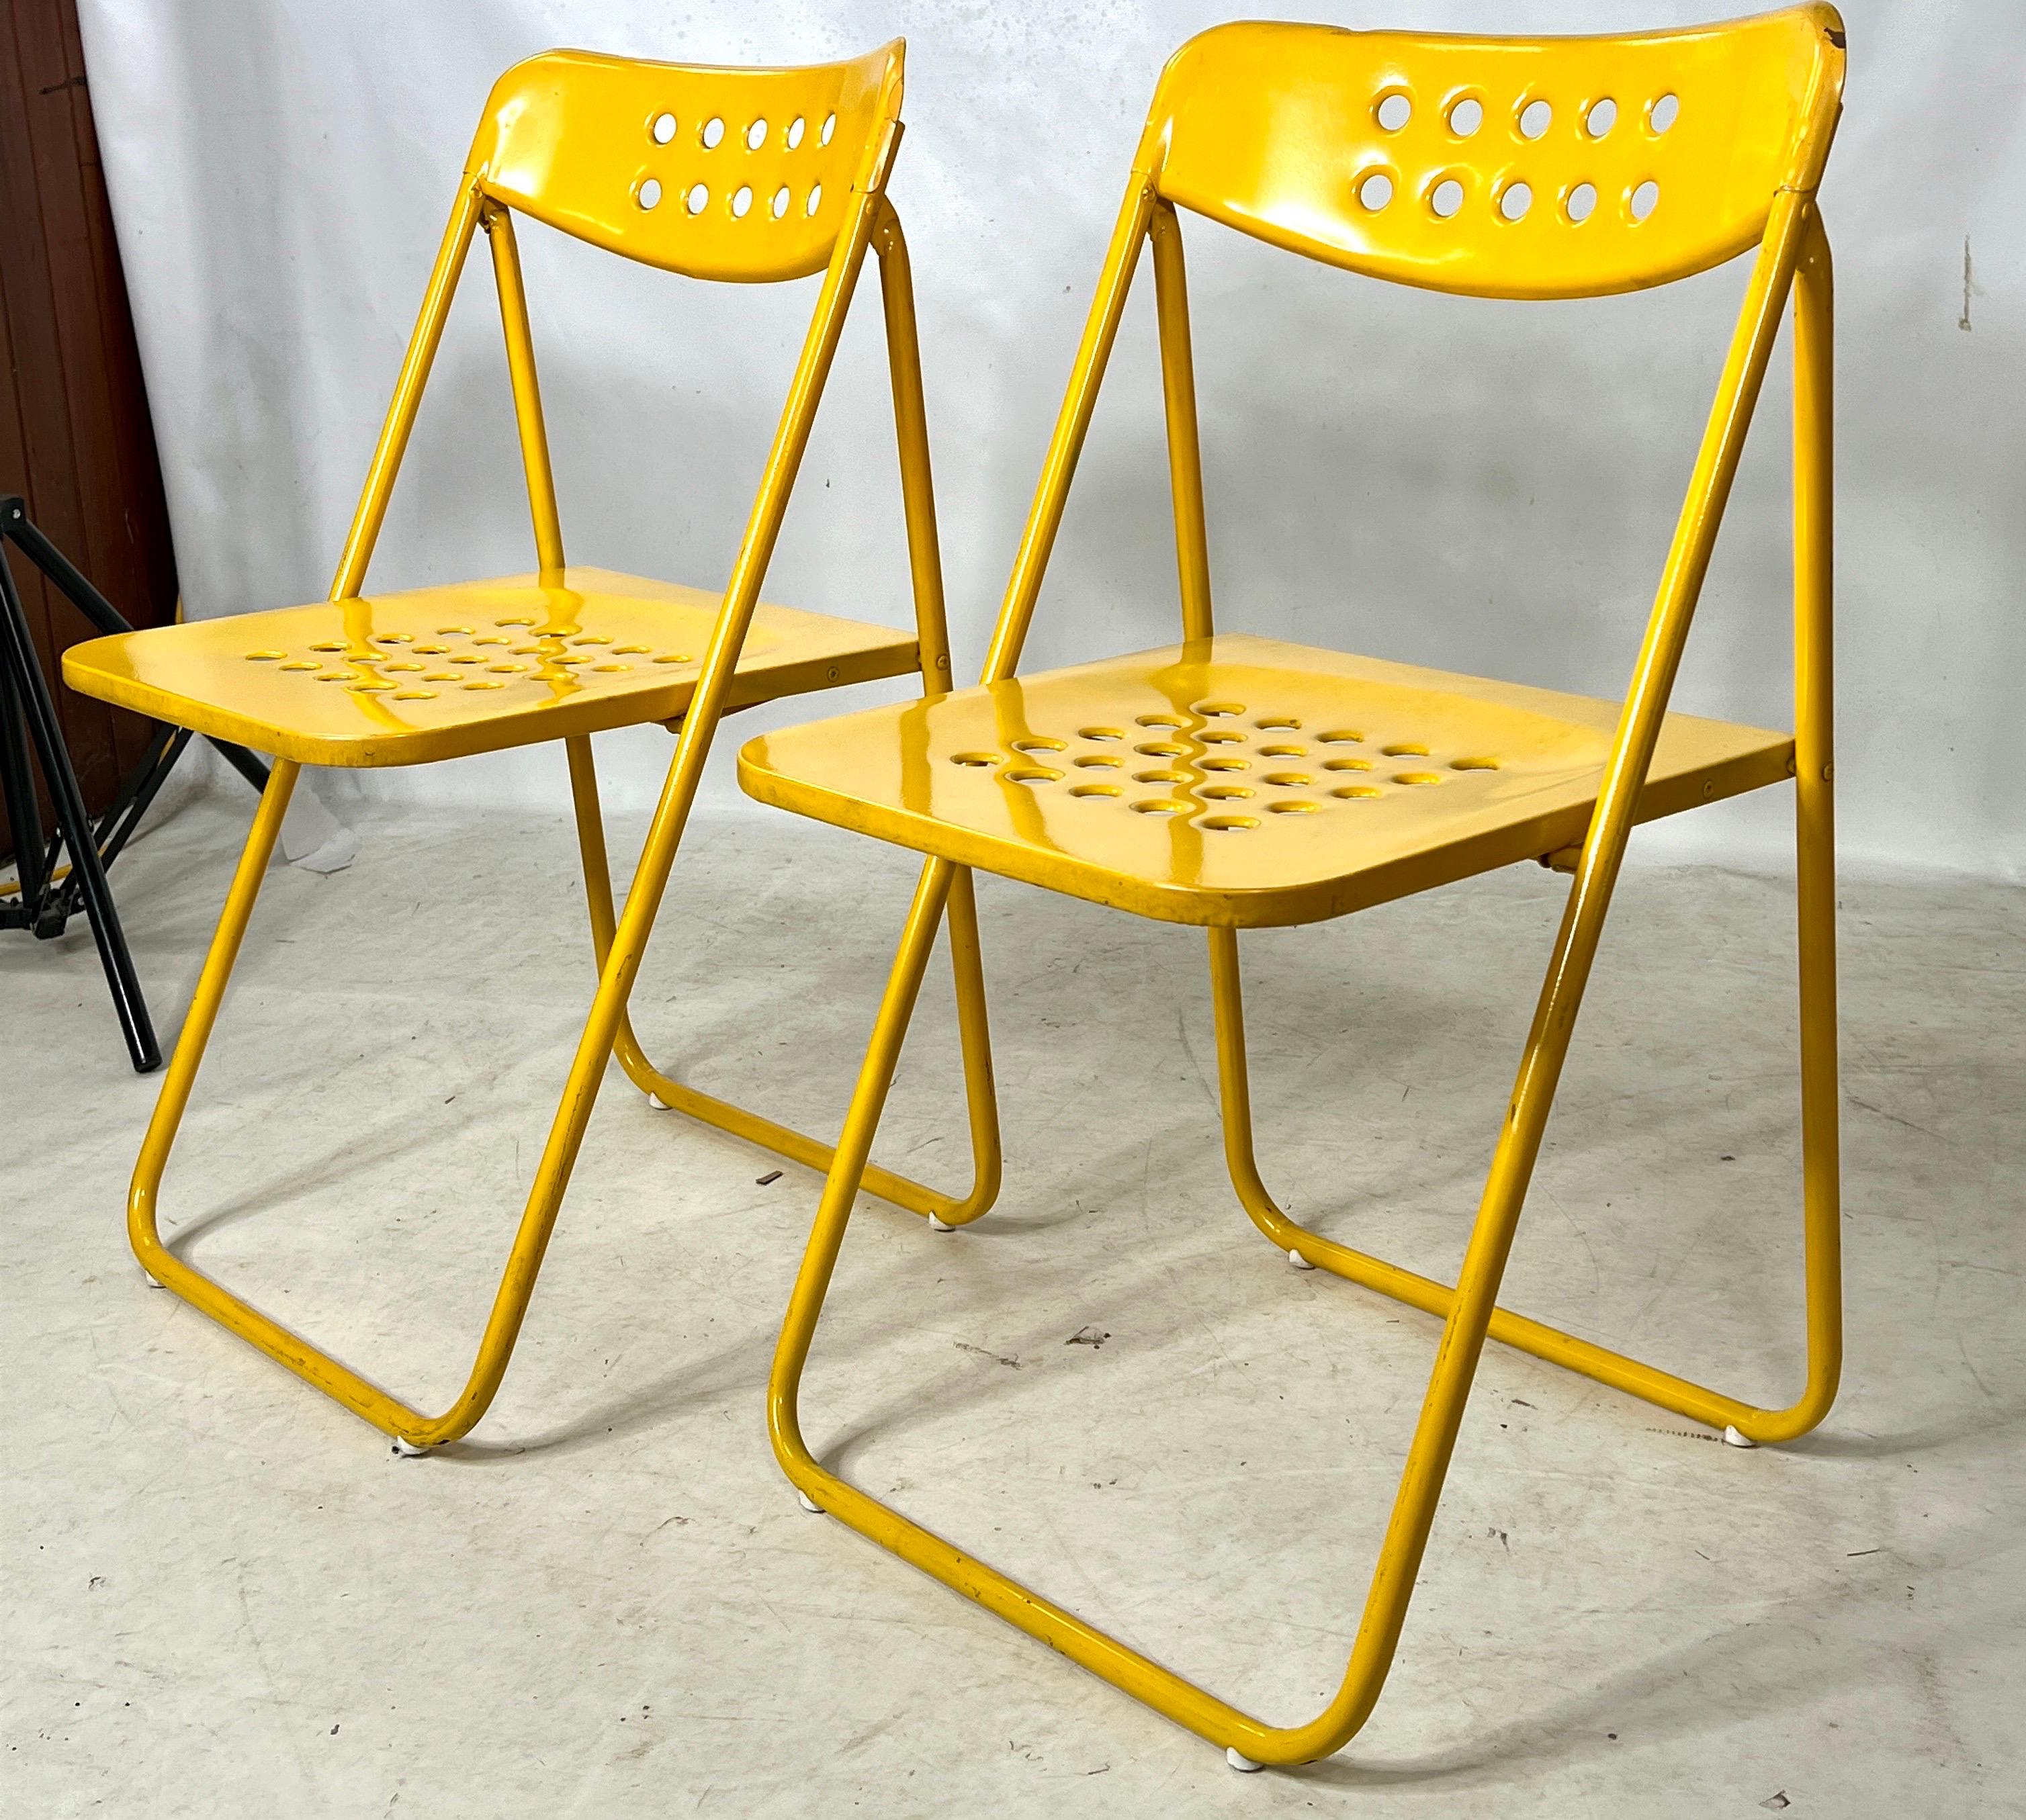 This is a great set of two vintage folding chairs made out of metal